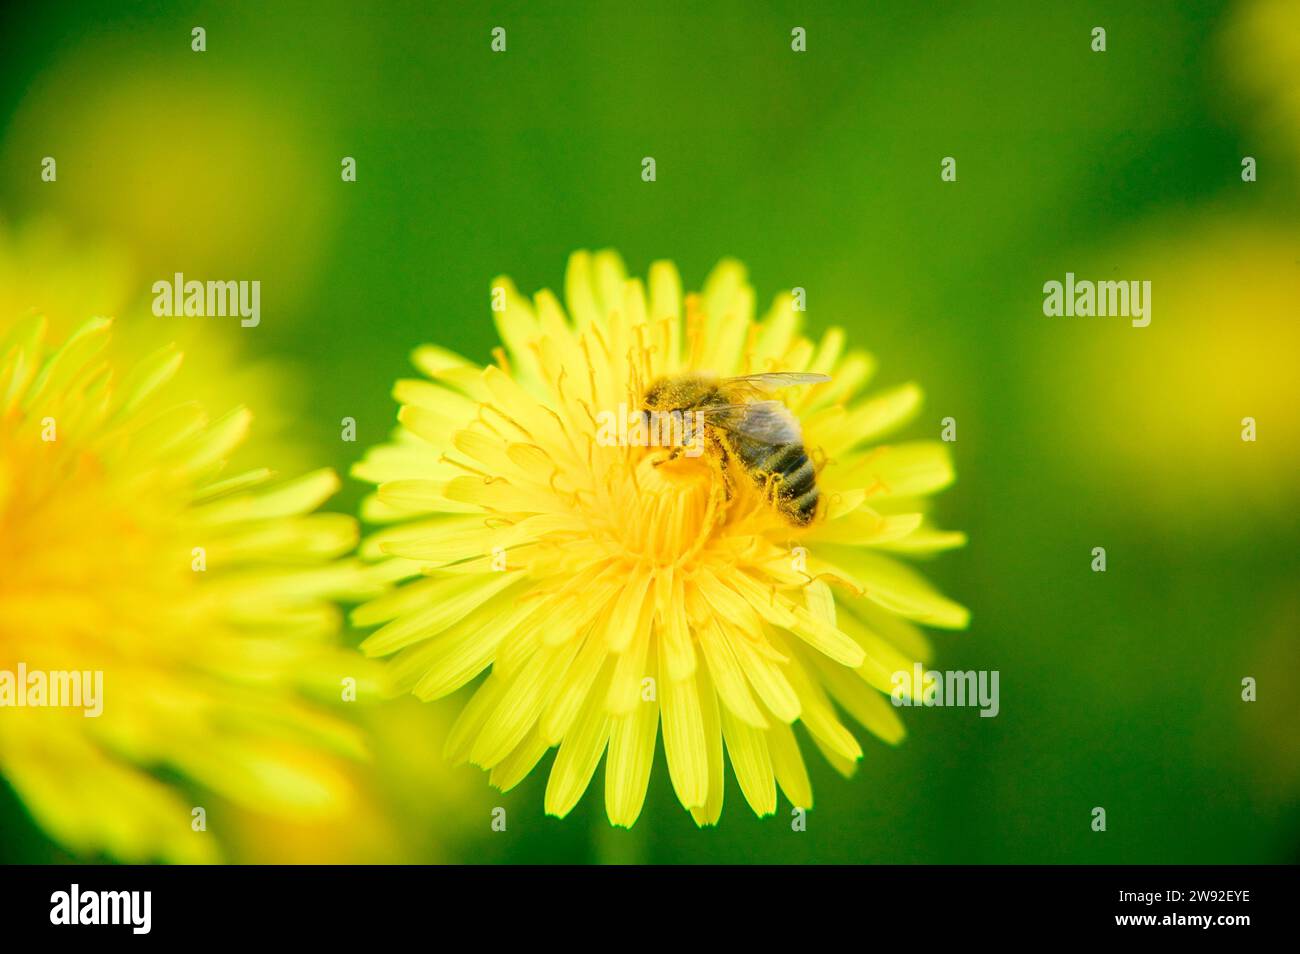 The common dandelion (Taraxacum) is a group of very similar and closely related plants in the dandelion genus of the Asteraceae family. These plants Stock Photo